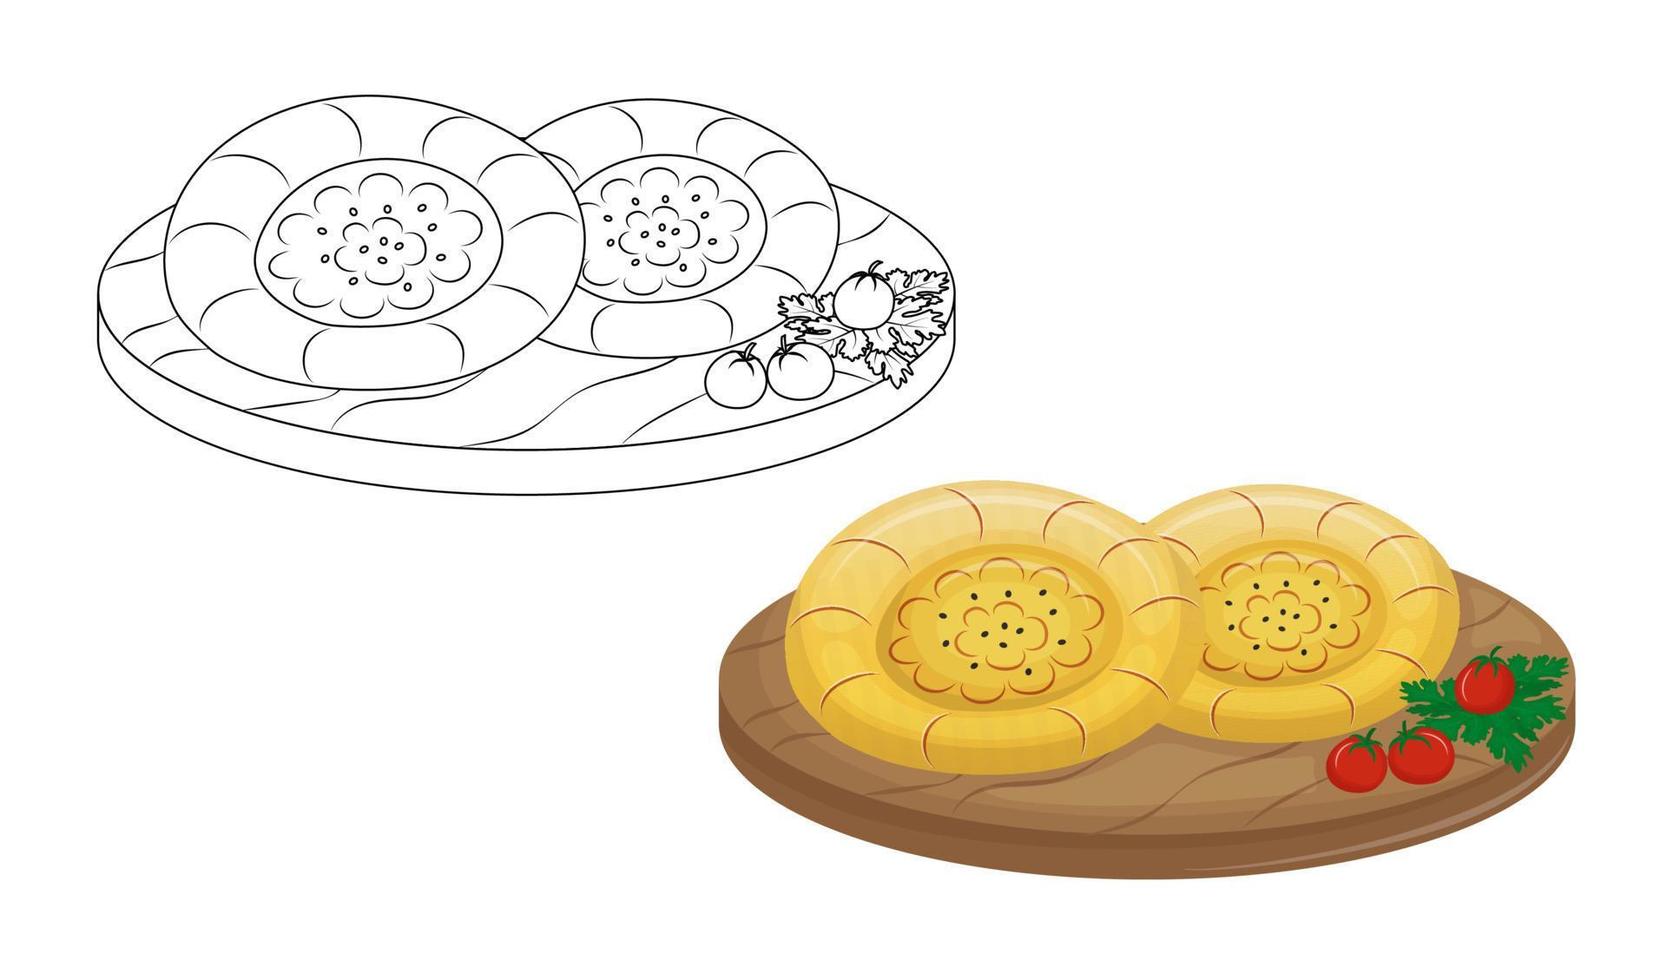 Traditional Central Asian bread baked in a tandoor. Kids coloring book for elementary school.Tandyr flatbread or samosa. Vector illustration.